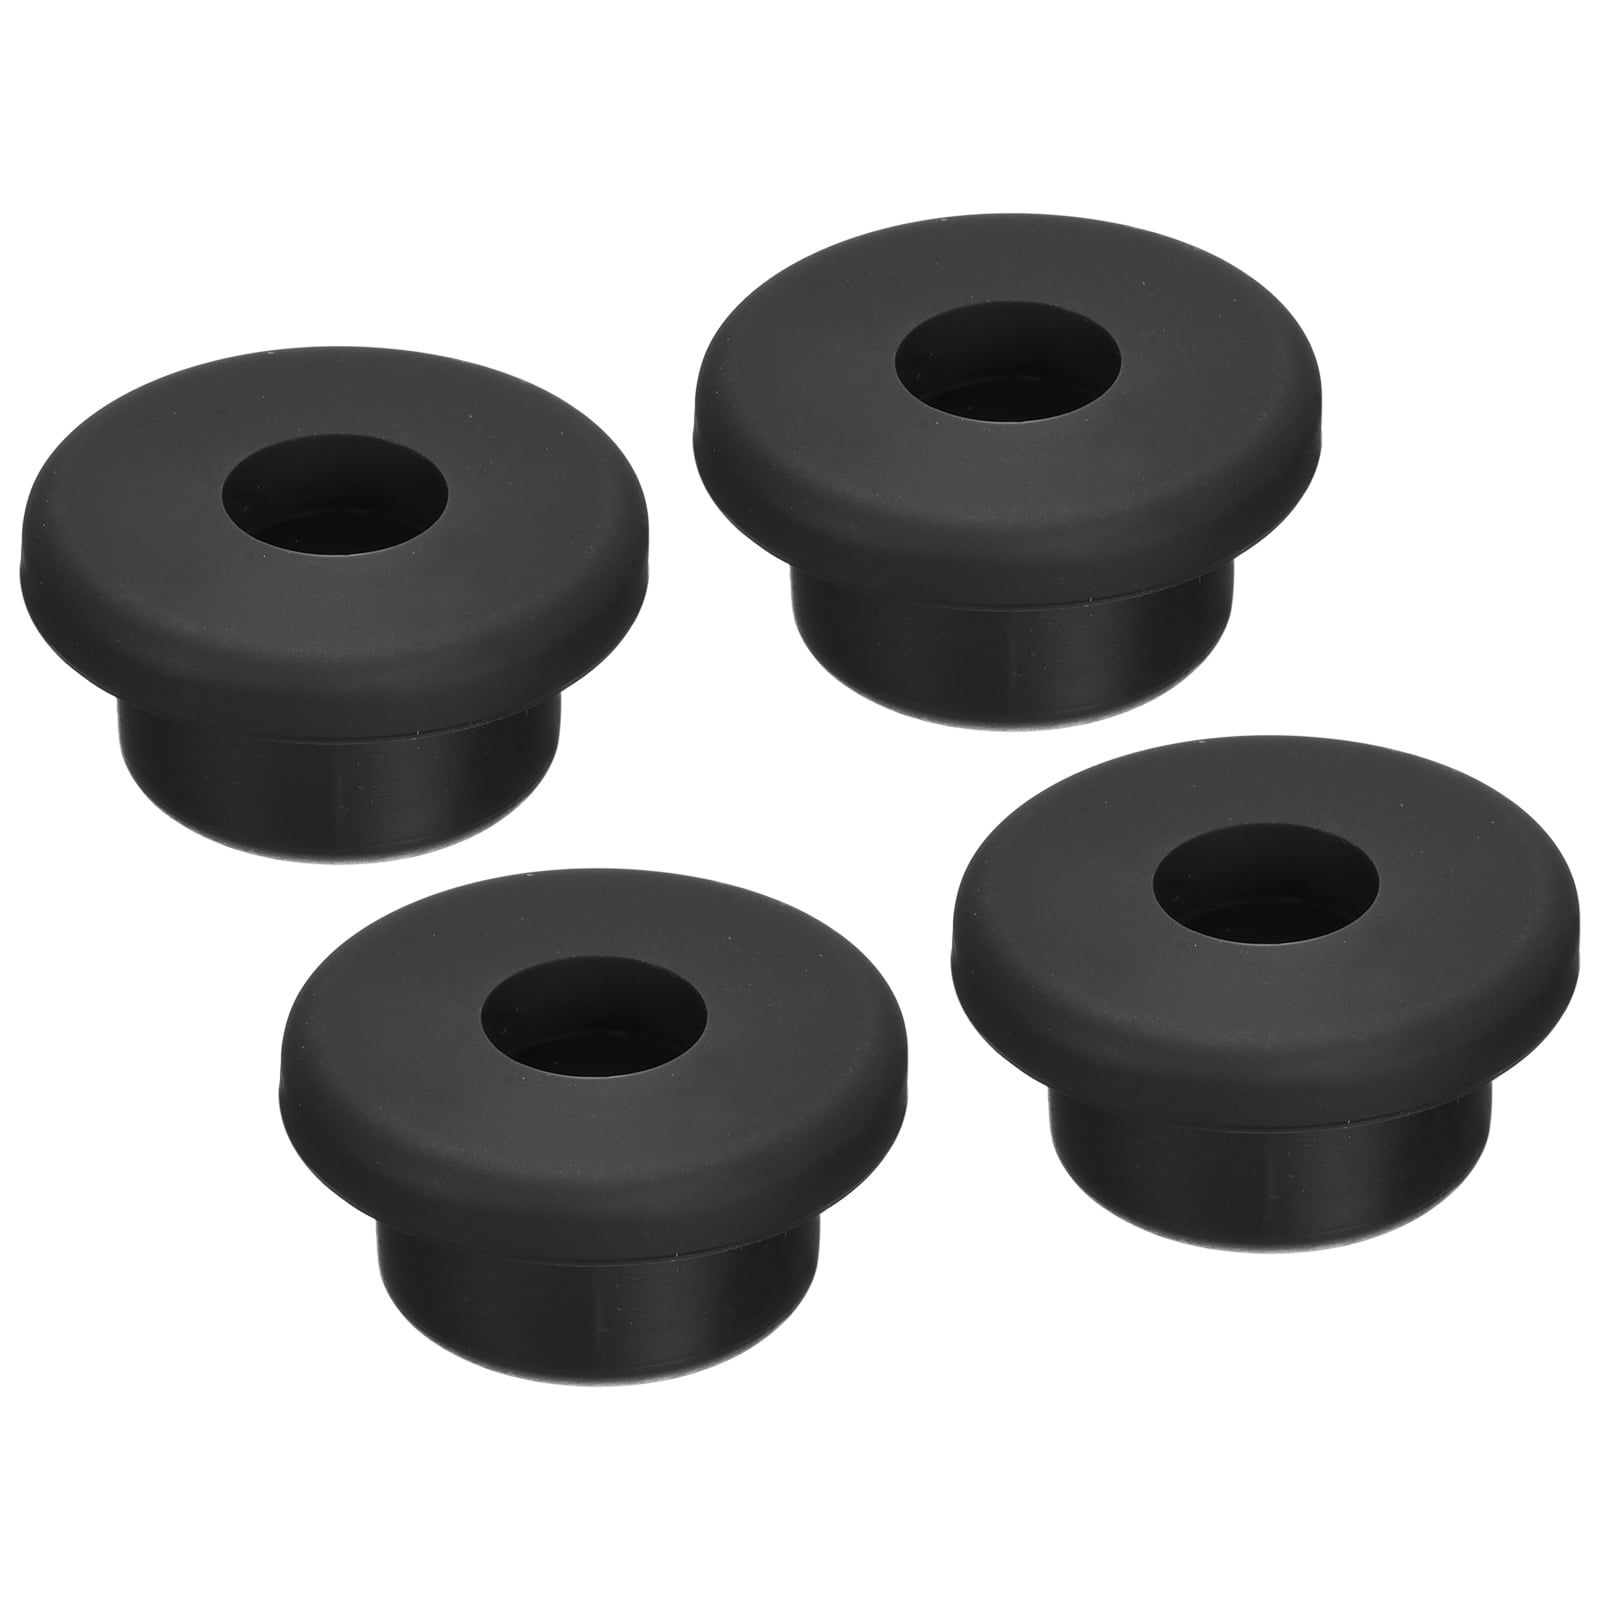 Uxcell Rubber Grommet Mount Dia 5/8 inch (16mm) Round T Type for Wire Protection 4 Pack, Size: 5/8 x 9/32 x 15/16 -Inch, White